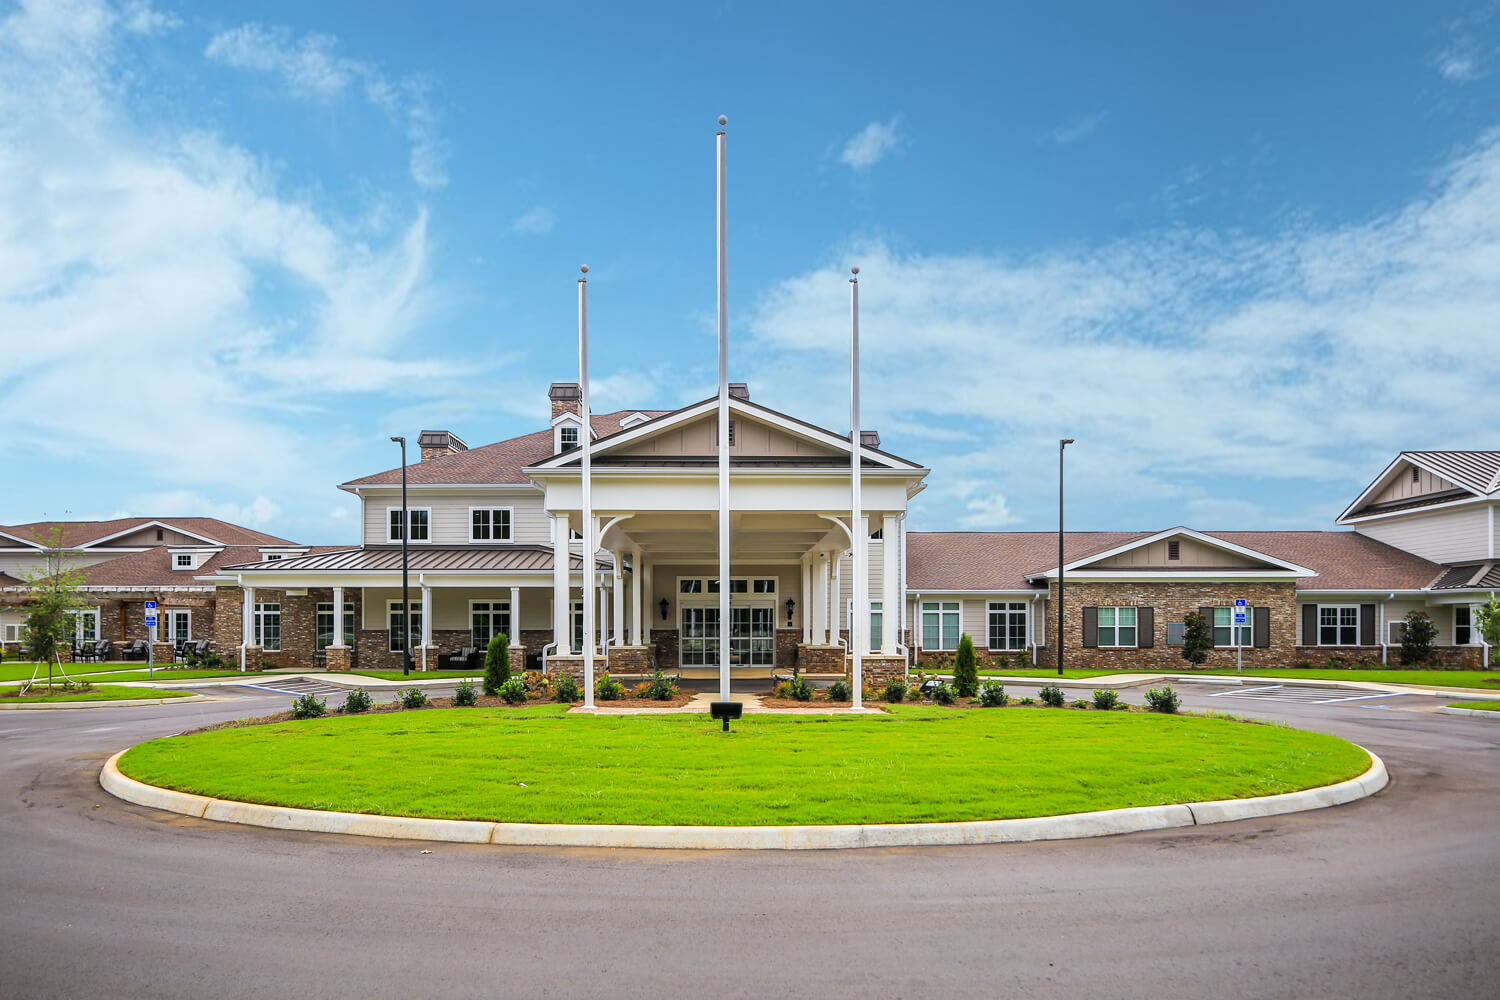 Grand South Senior Living - View from Front - Designed by Foshee Architecture